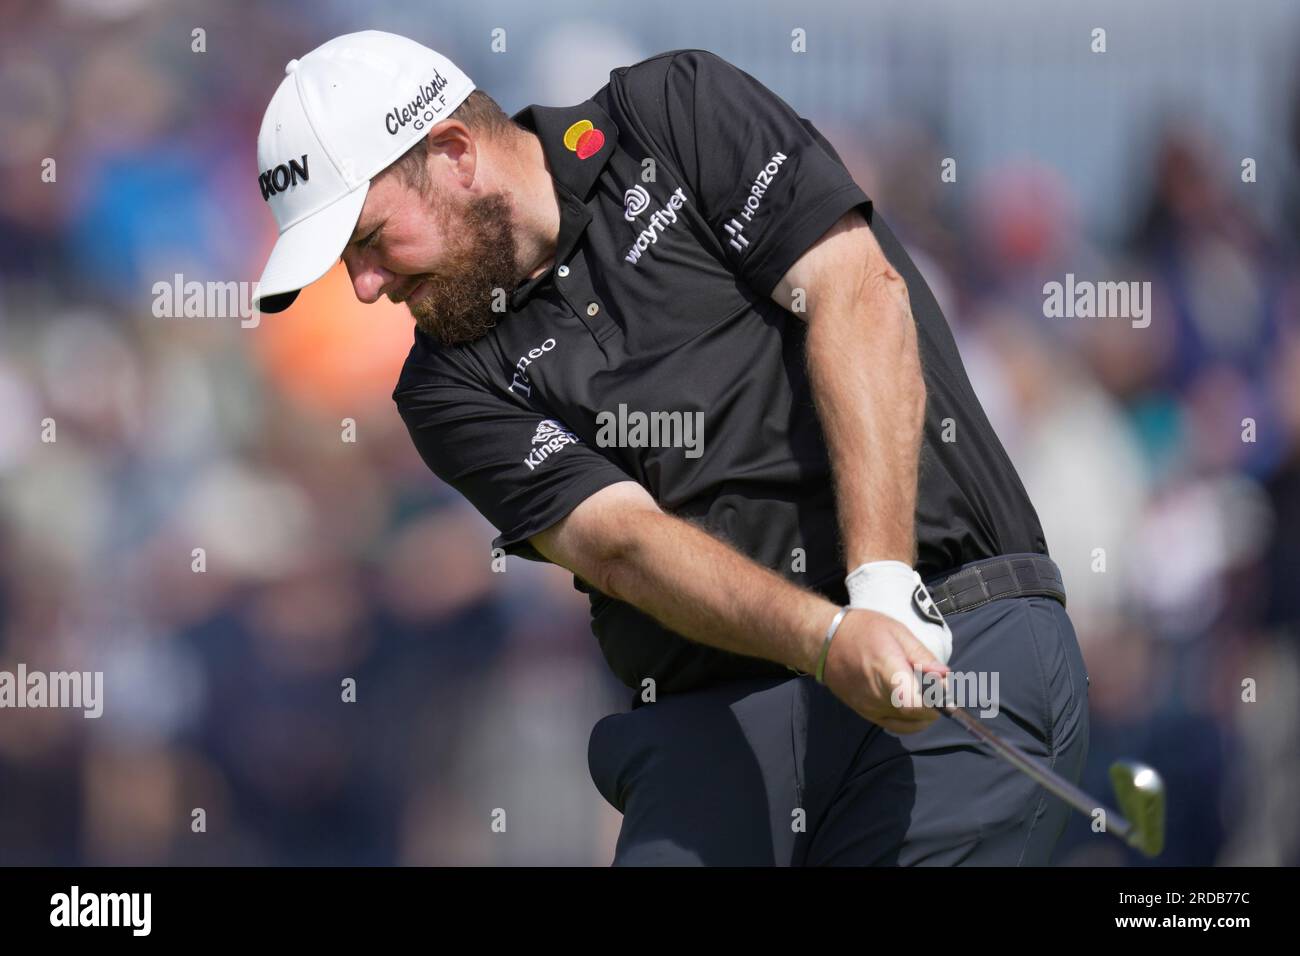 Irelands Shane Lowry hits his tee shot from the 4th on the first day of the British Open Golf Championships at the Royal Liverpool Golf Club in Hoylake, England, Thursday, July 20,